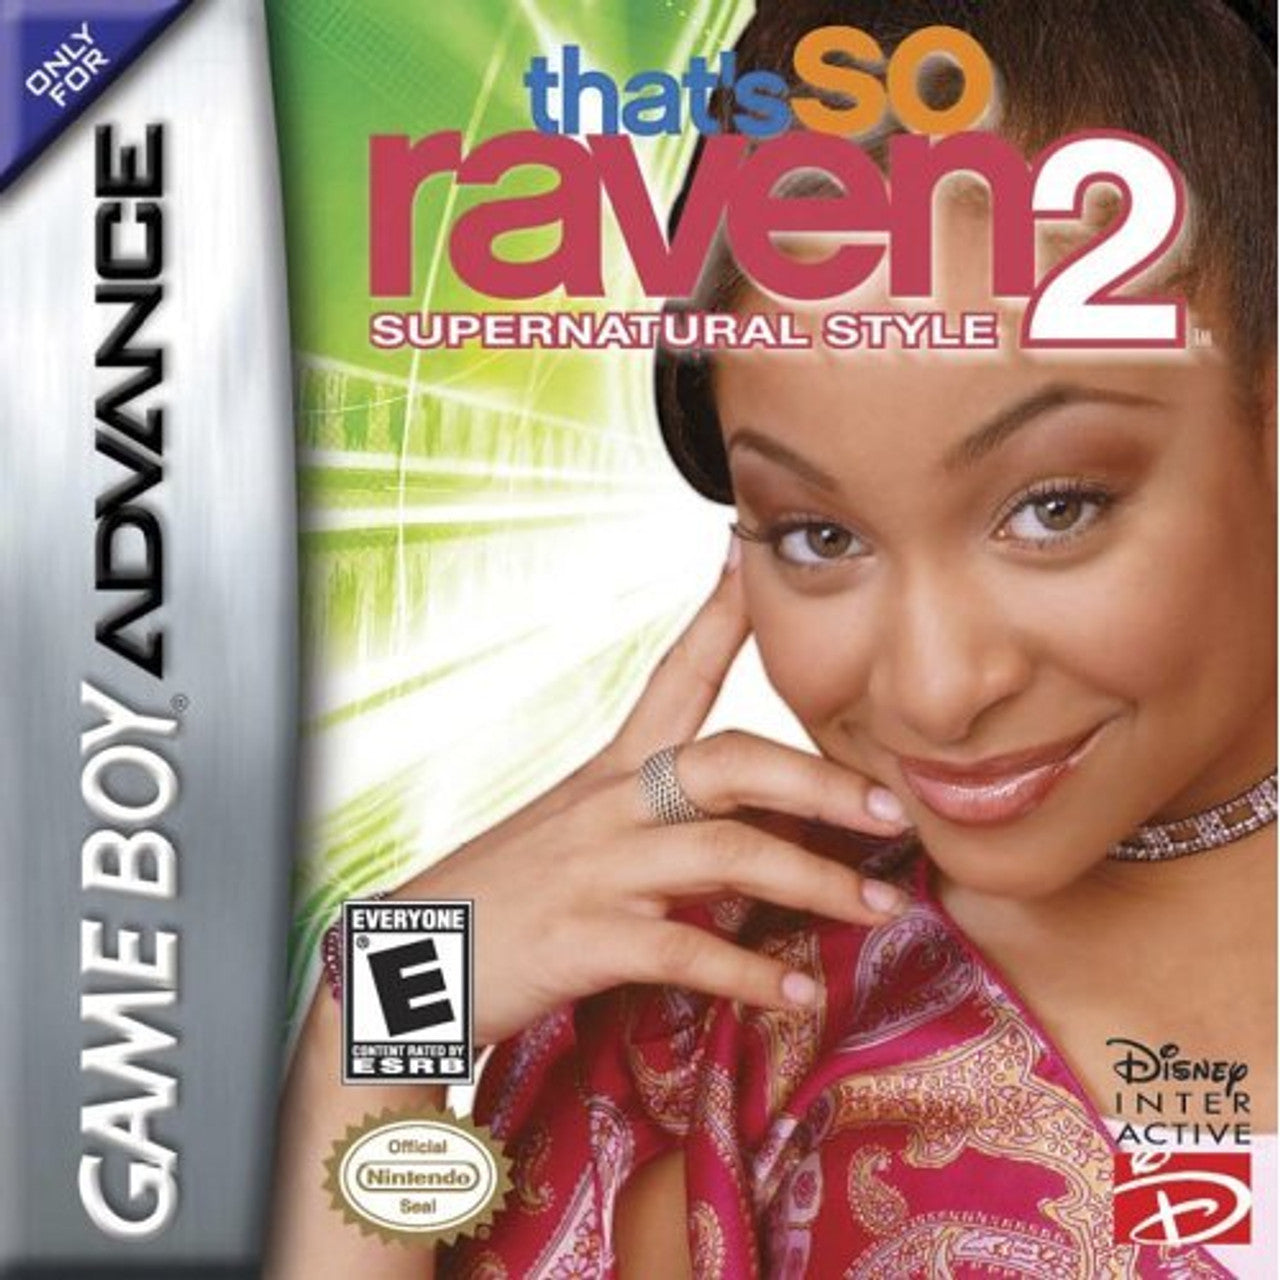 That's So Raven 2 Supernatural Style GBA